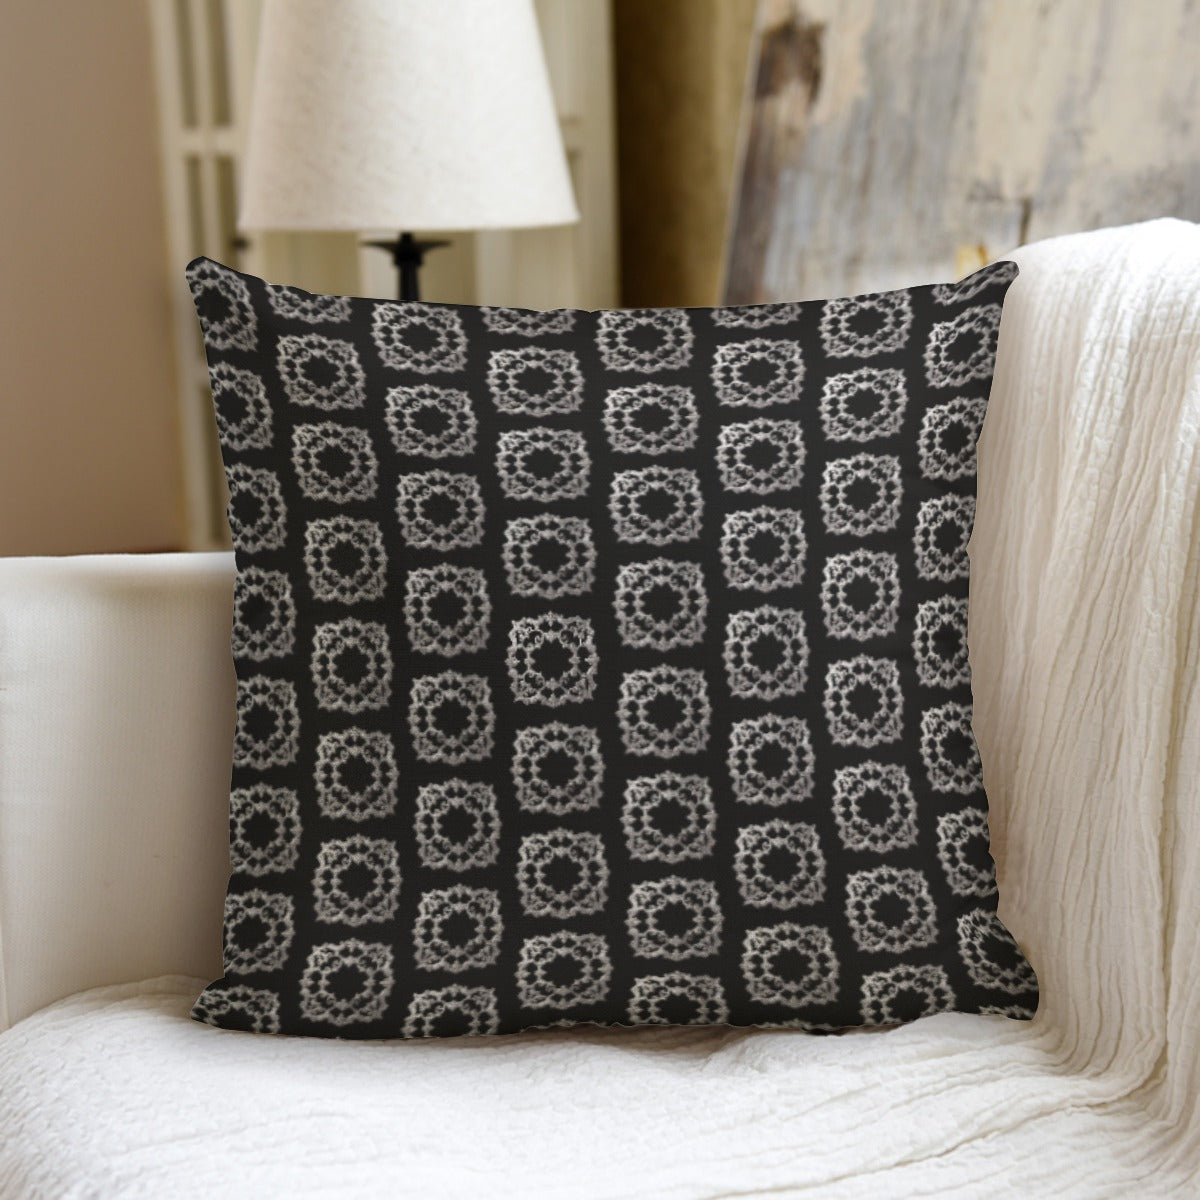 AC BAROQUE All-Over Print Throw cushion with pillow Inserts